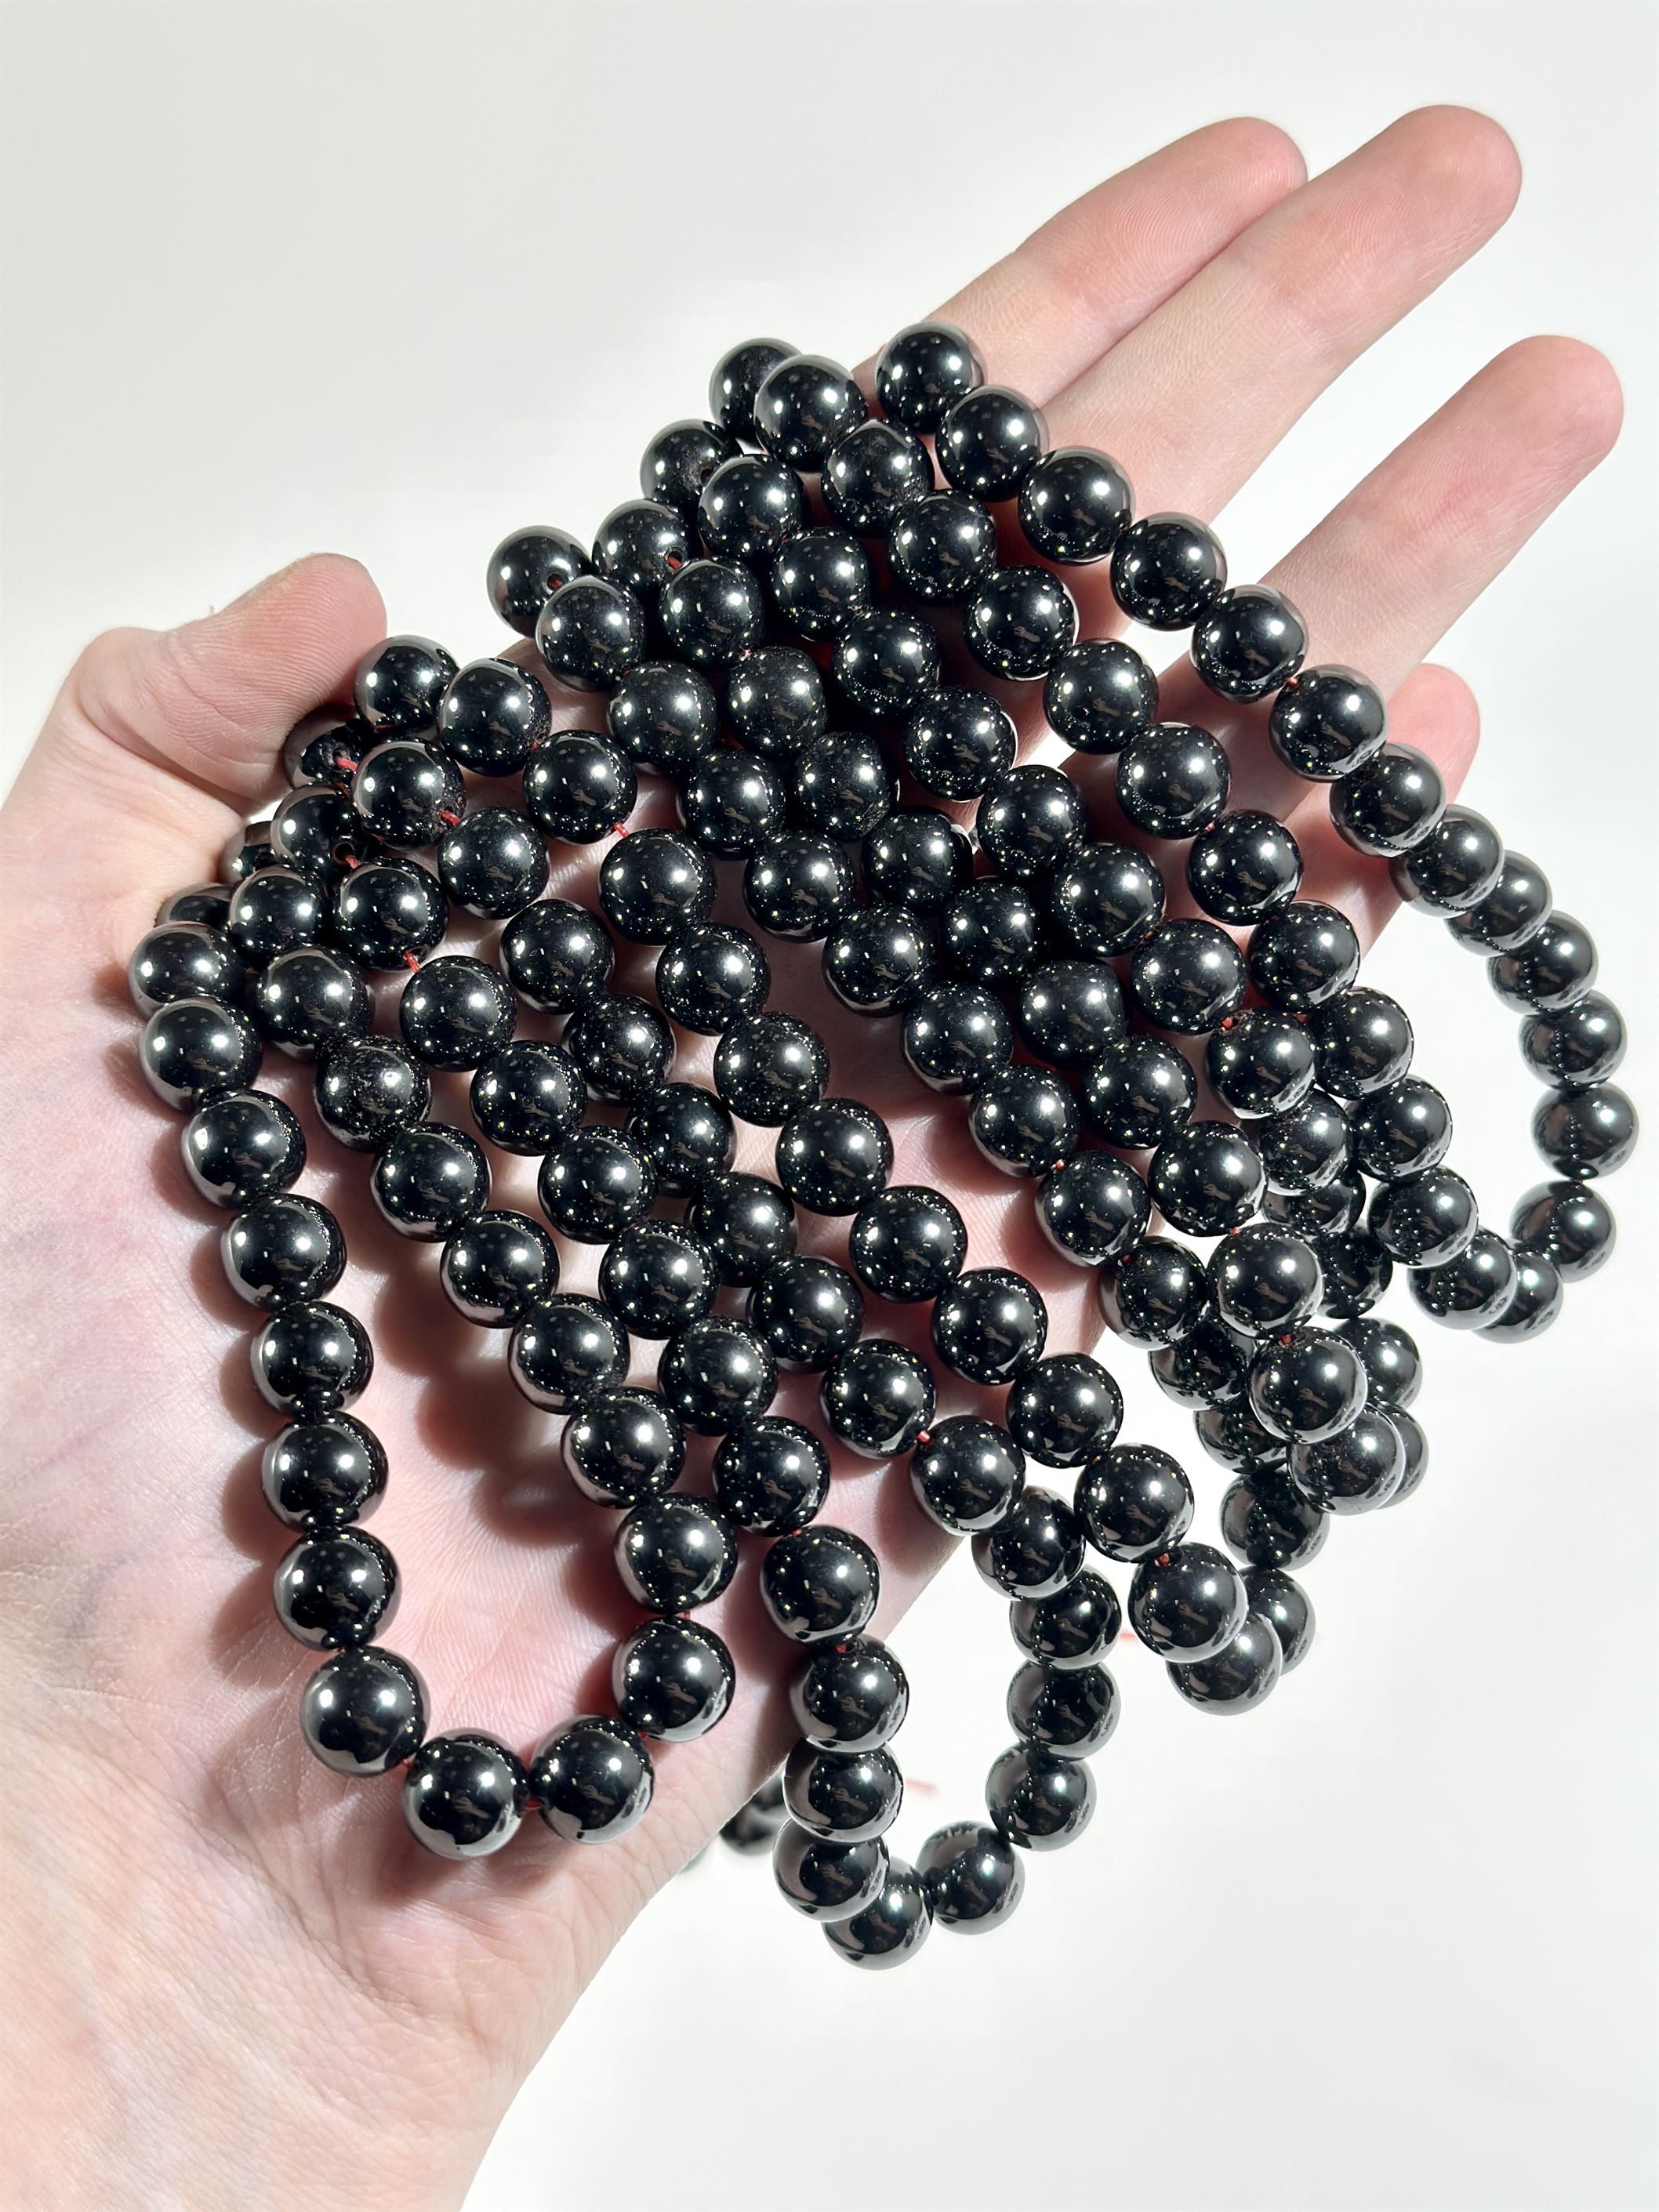 Synthetic Hematite Electroplated Matte Black 5-8mm Chip Beads - 8 inch  strand